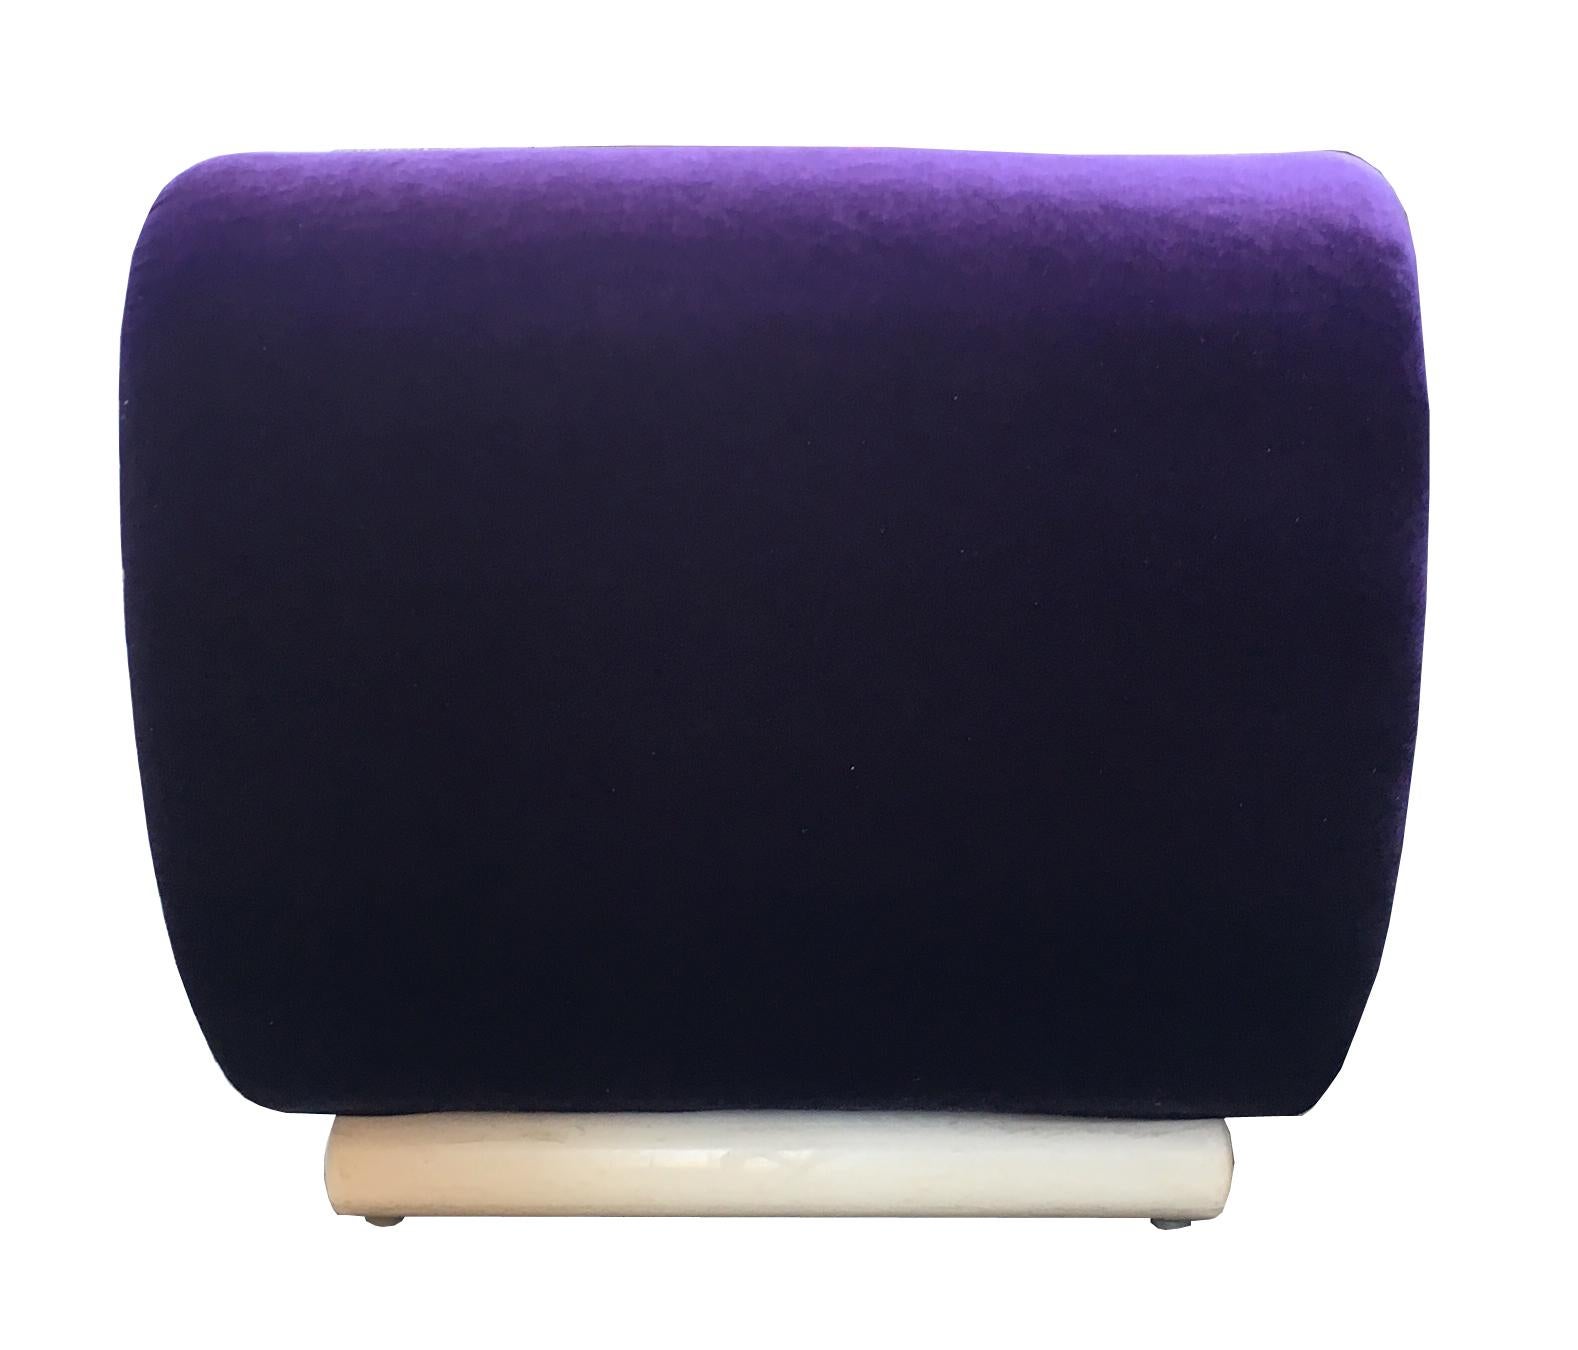 Four armchairs with a curved profile covered with violet velvet, white lacquered wooden bases, Italy, 1970s. Dimensions: cm 72 x 93 x 76 H; H seat cm 41.